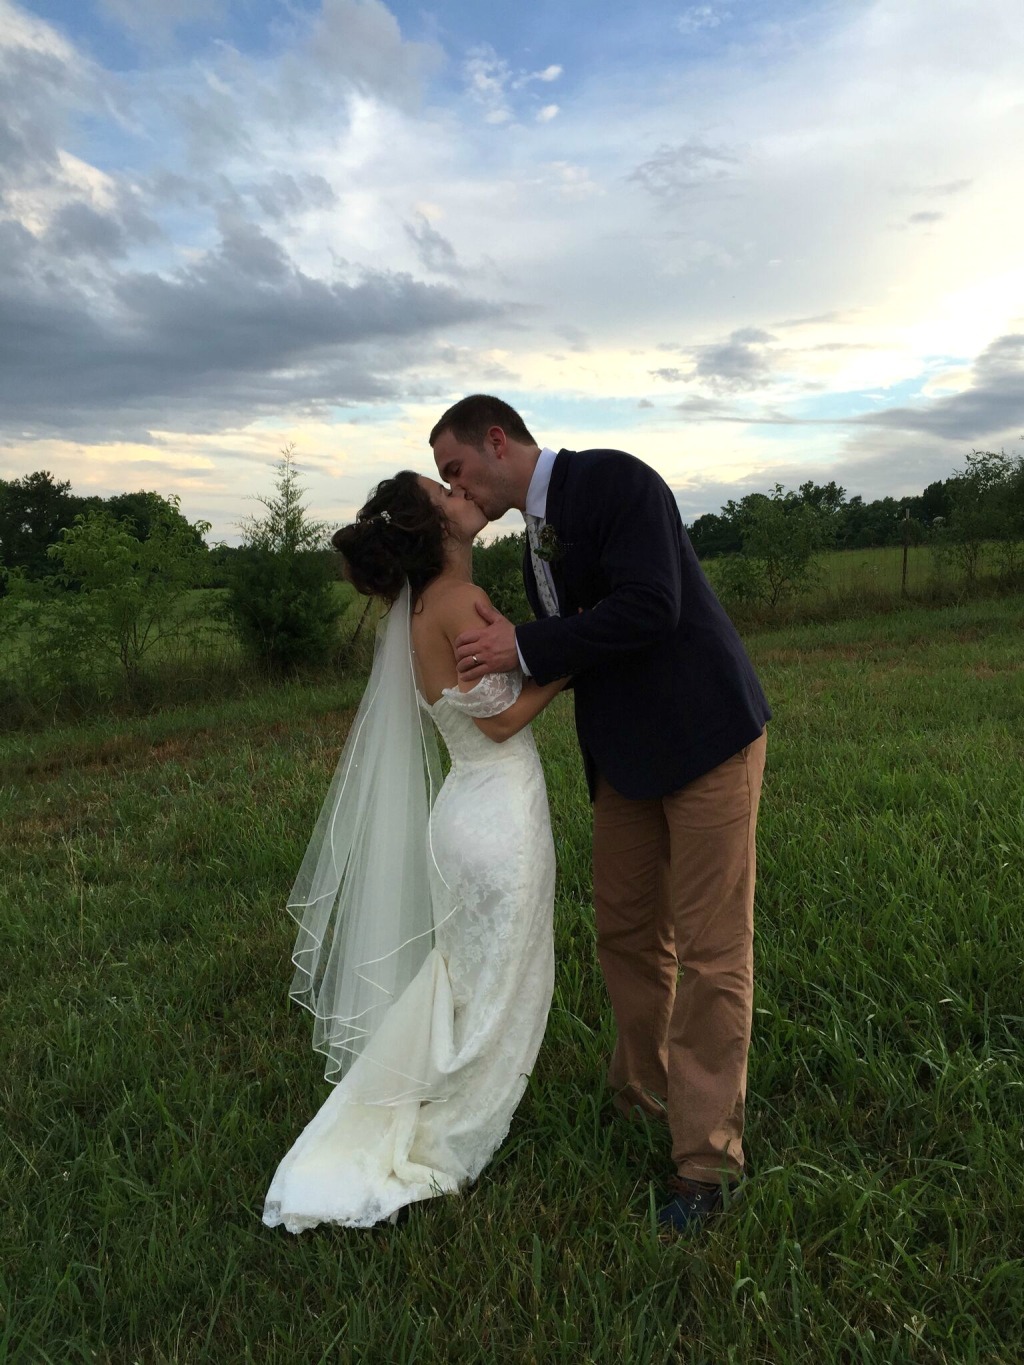 When Storms Come in Marriage – WW Linkup